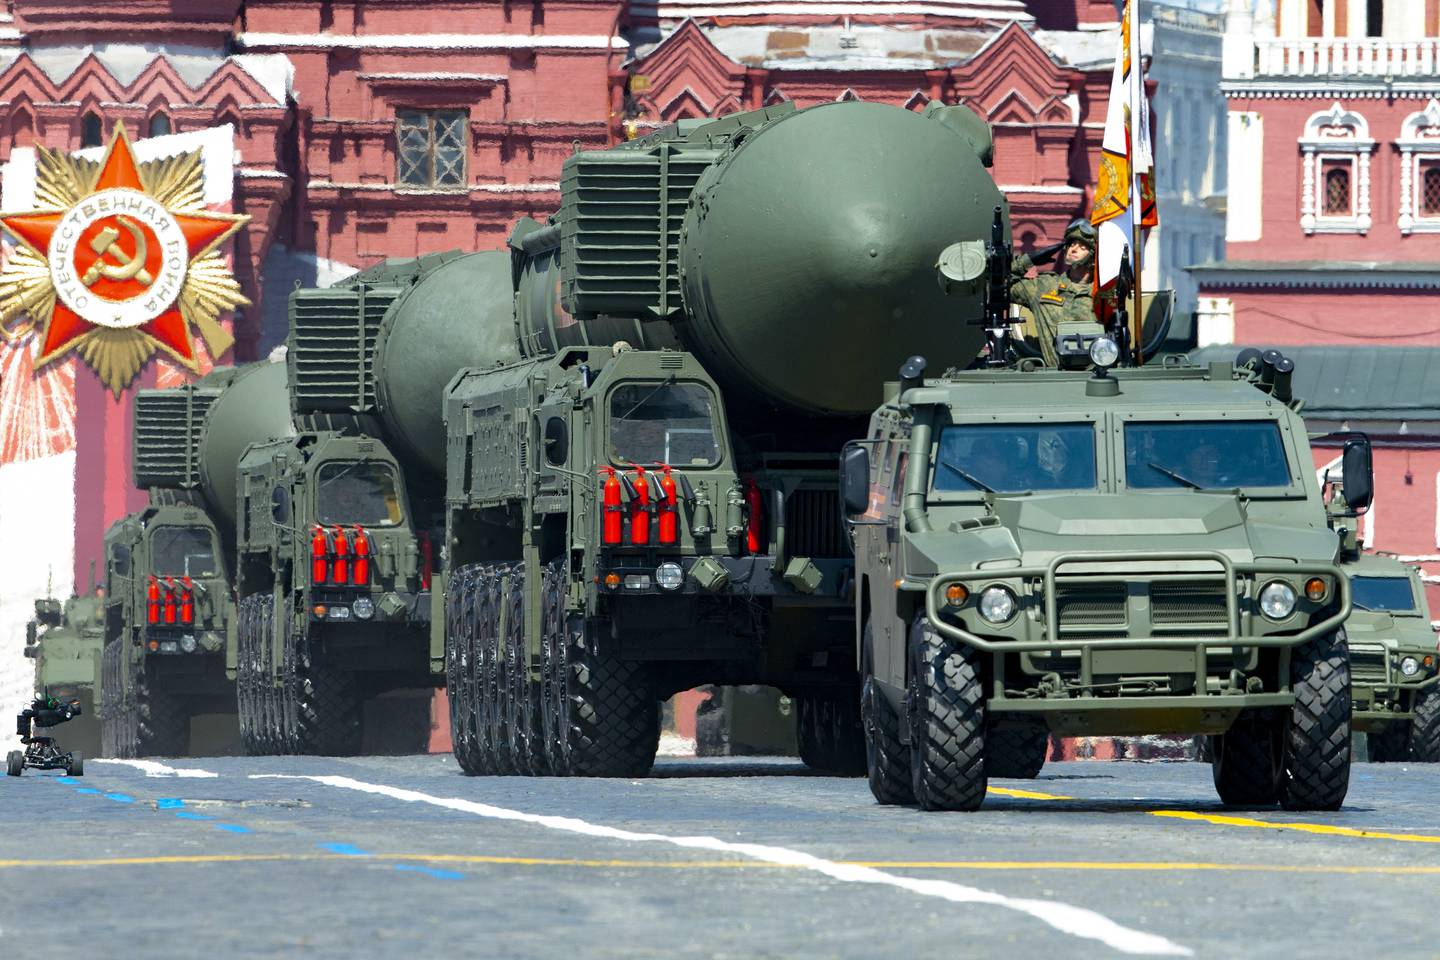 Russian RS-24 Yars ballistic missiles roll into Red Square during a Victory Day military parade in Moscow. AP Photo